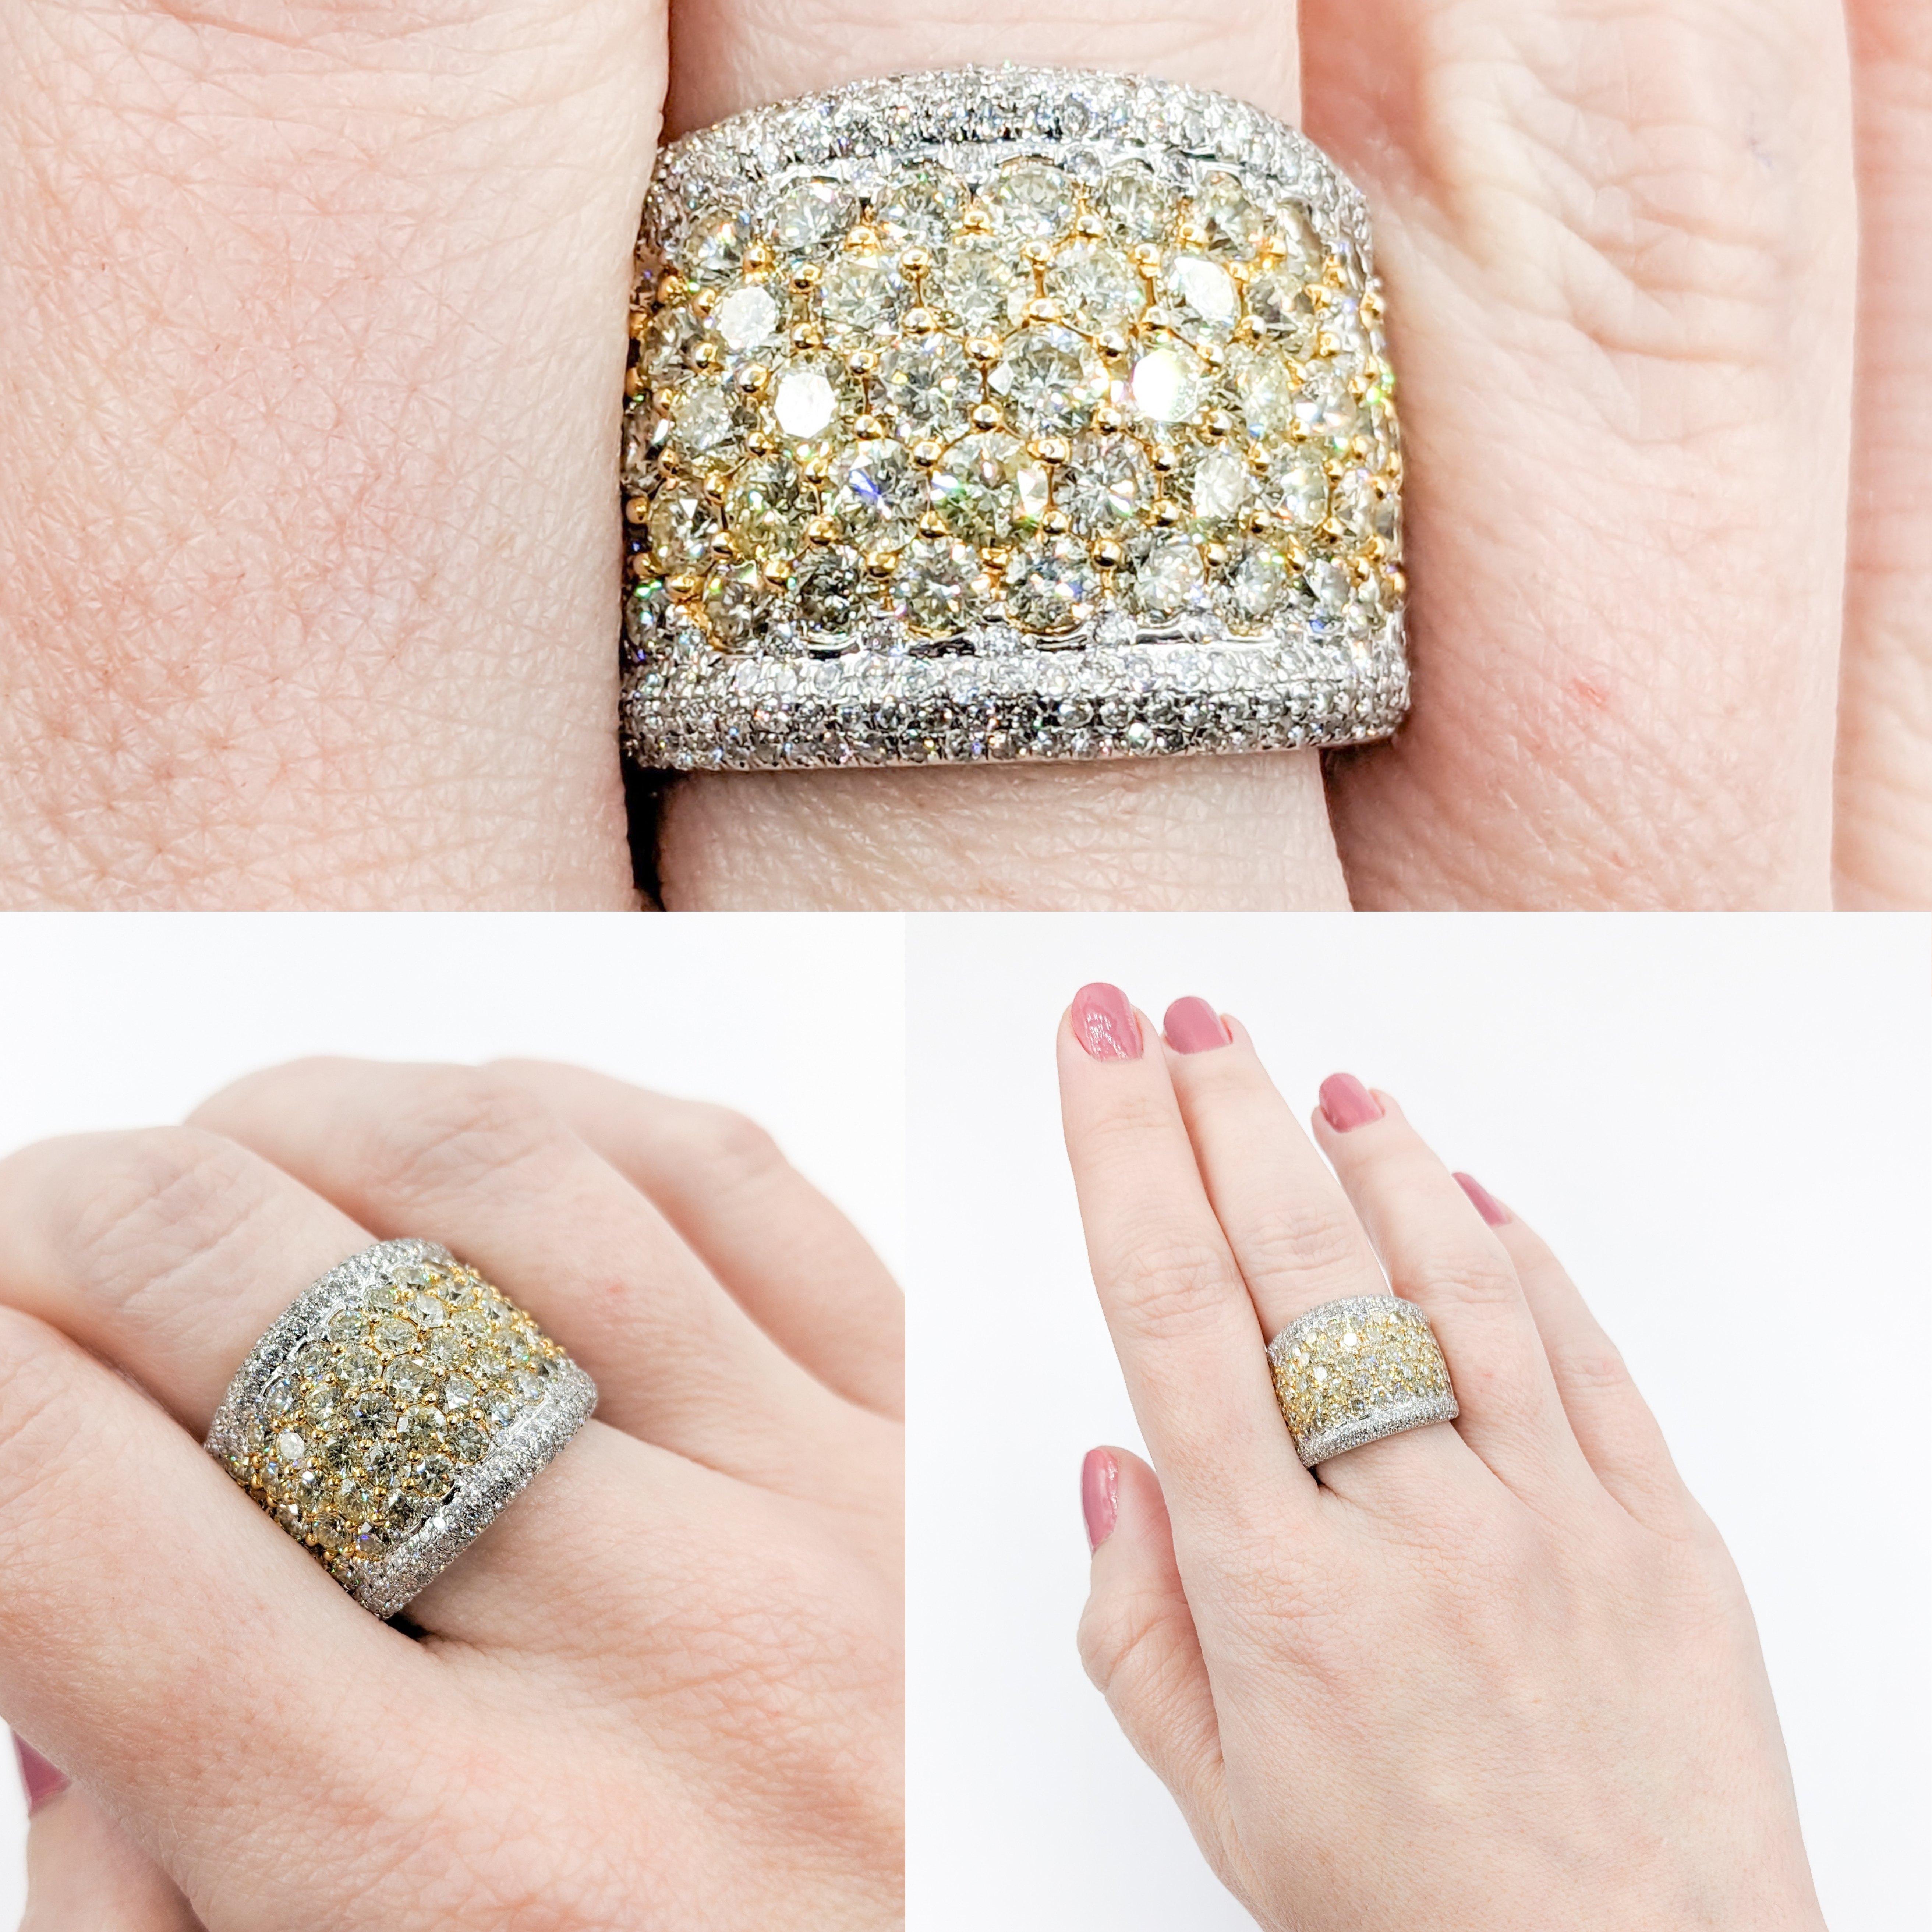 Mesmerizing 4.40ctw Yellow Diamond Pave Wide Band Ring

Embodying opulence, this 18k white and yellow gold wide band ring features a staggering 4.40ctw of round yellow & white diamonds. These vibrant diamonds, set in a pave style, boast SI clarity